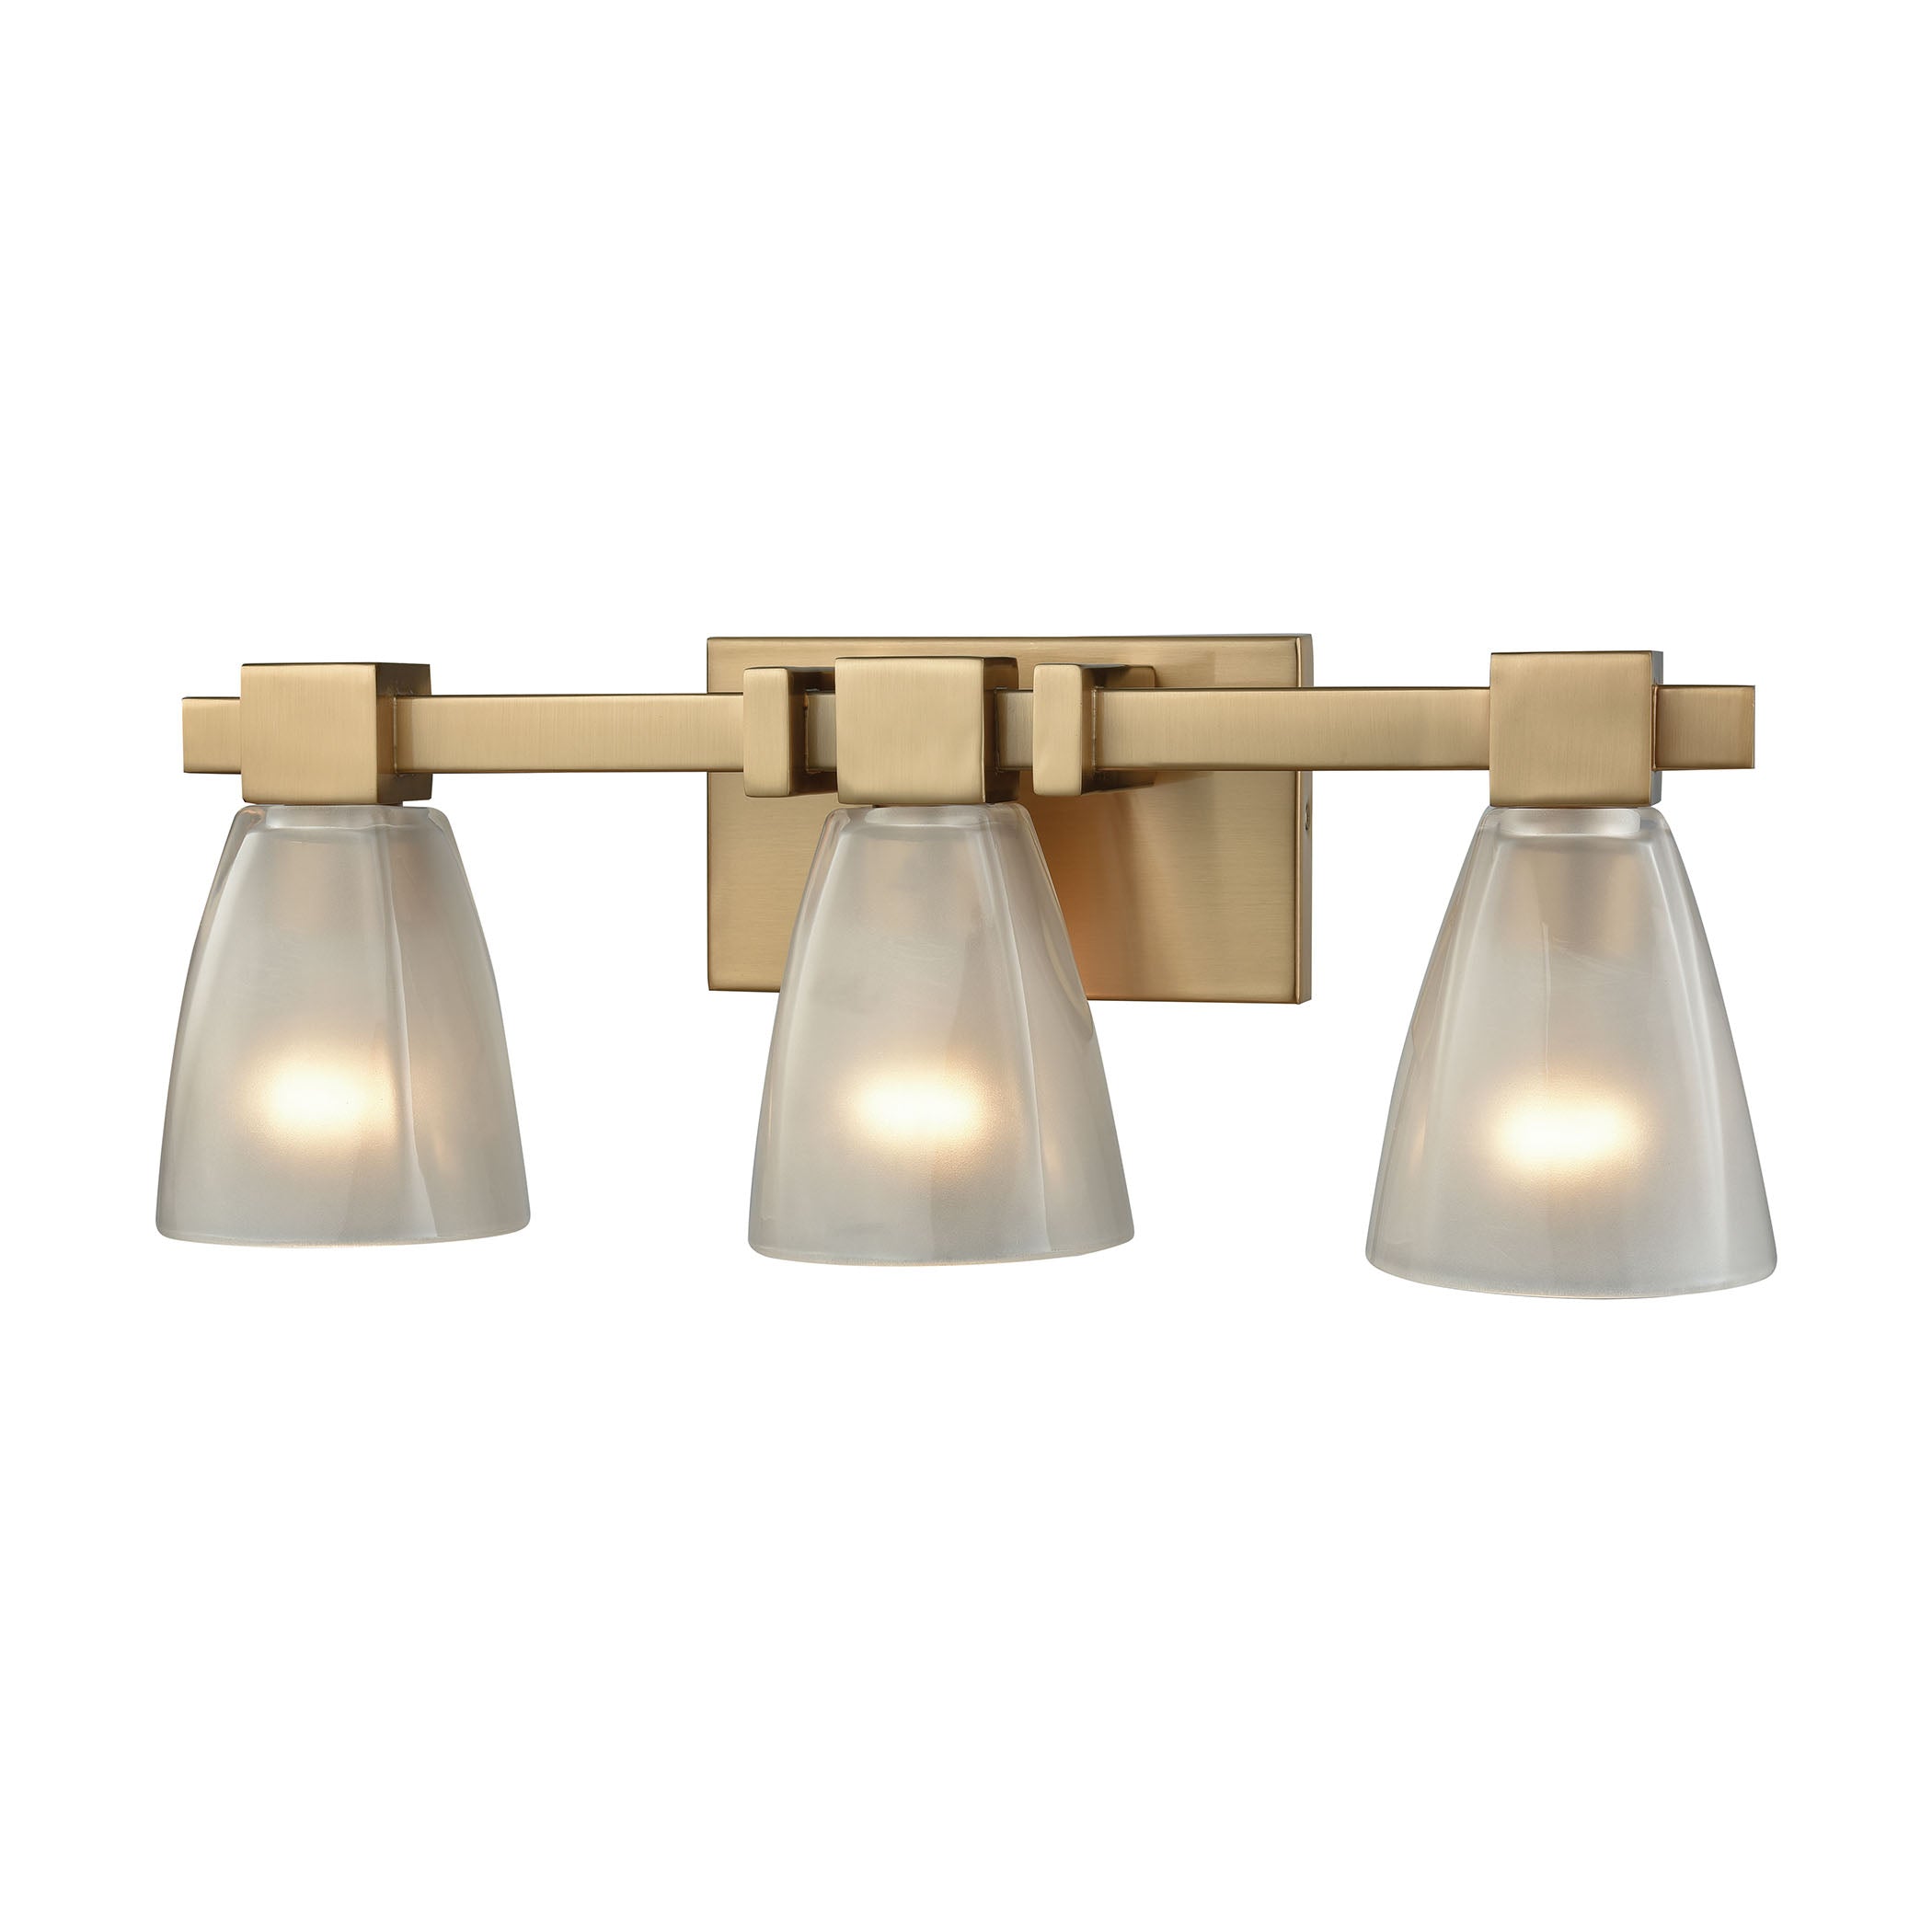 ELK Lighting 11992/3 Ensley 3-Light Vanity Lamp in Satin Brass with Square-to-Round Frosted Glass